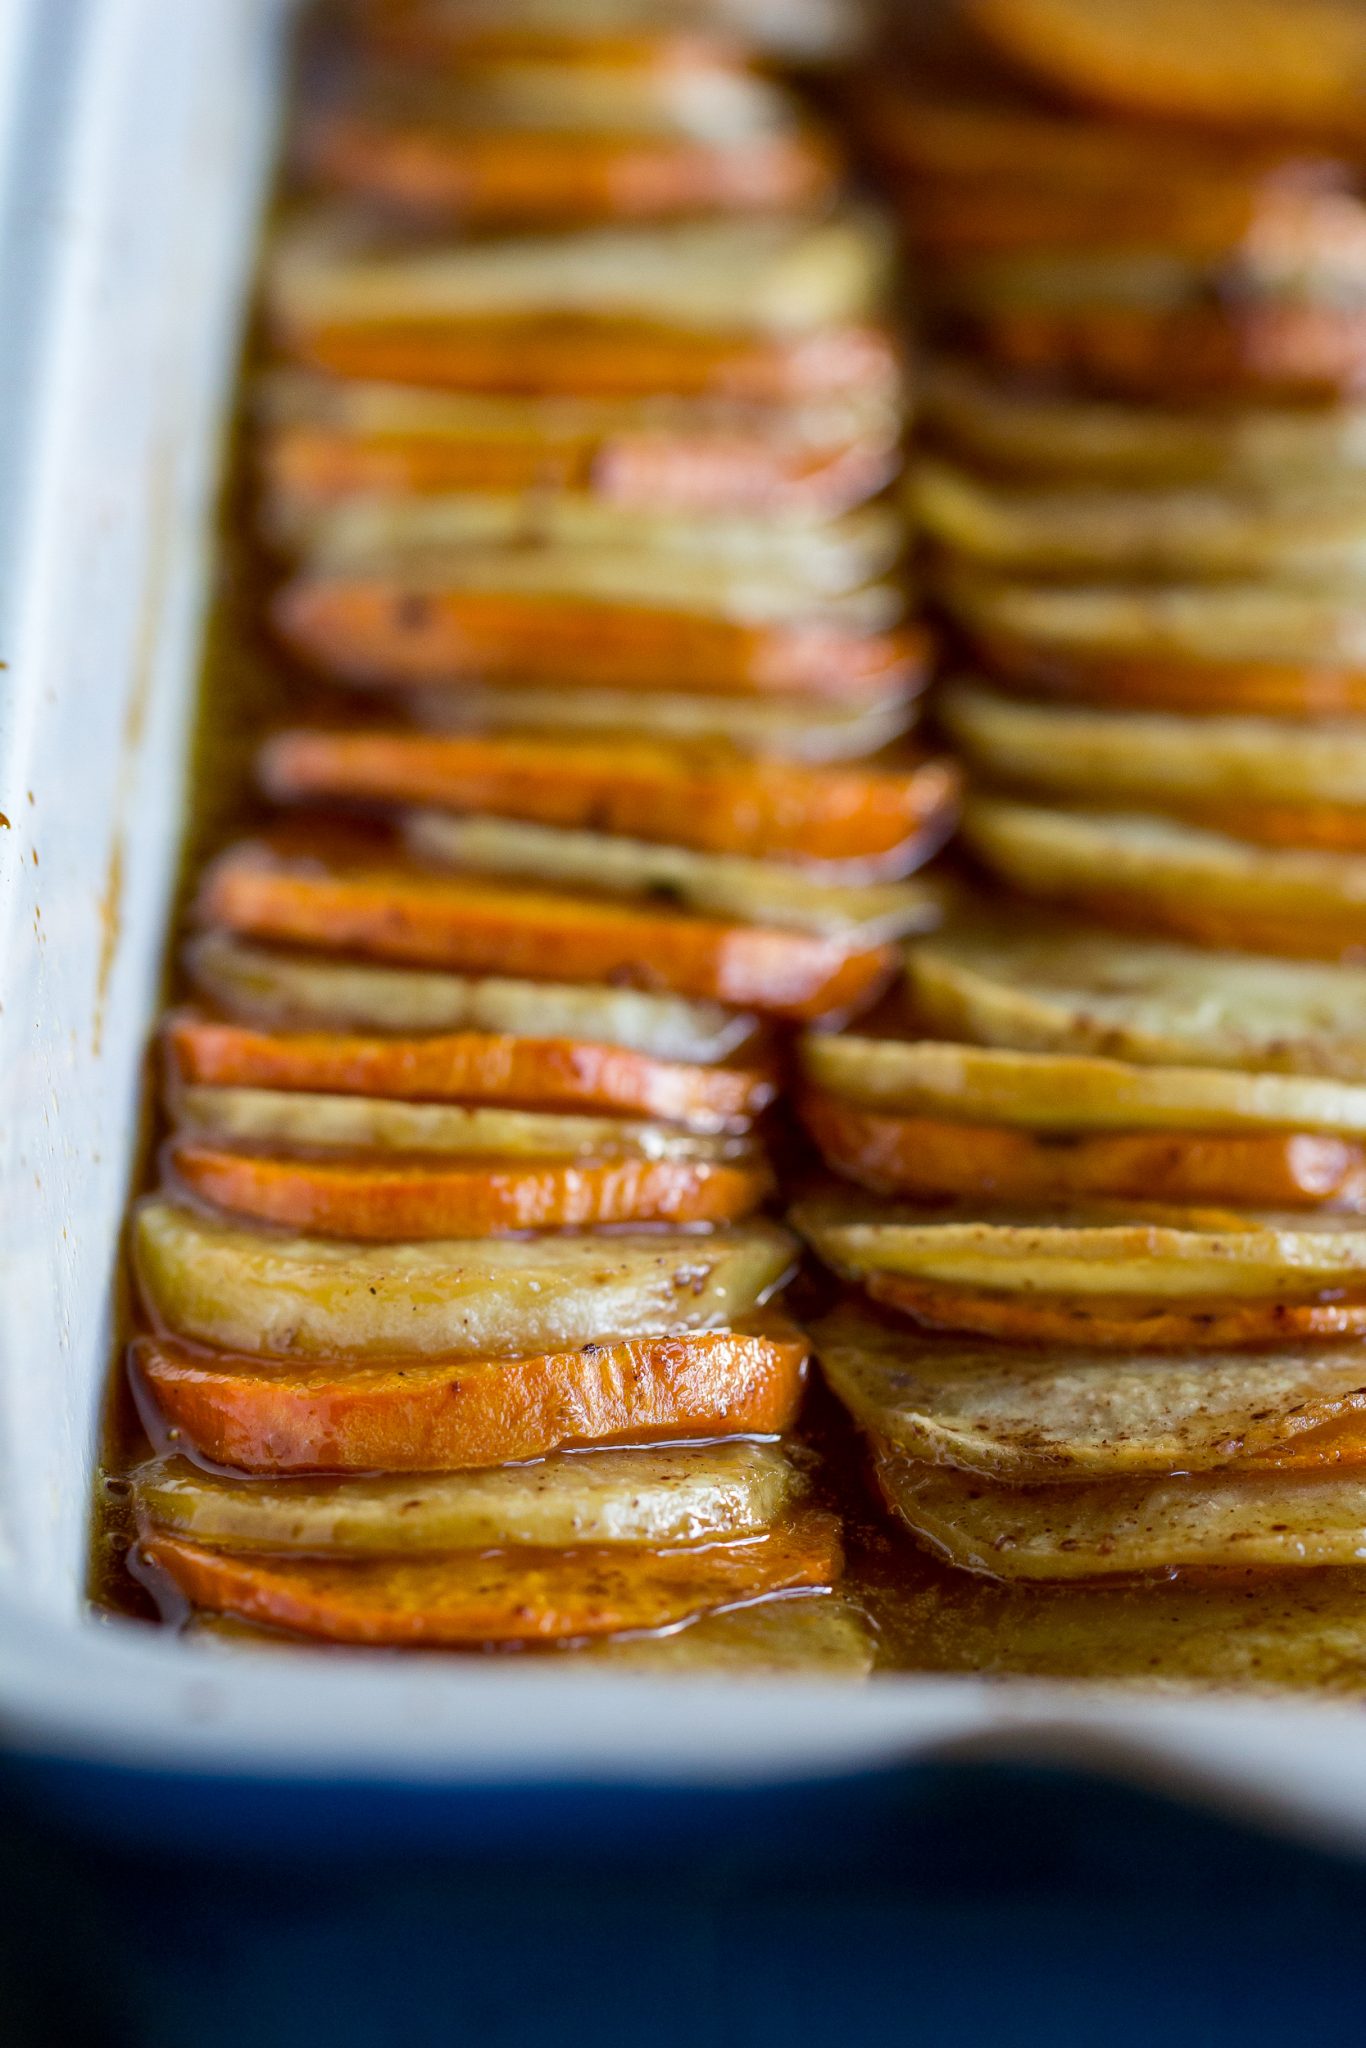 Traeger Grilled Sweet Potatoes - Or Whatever You Do